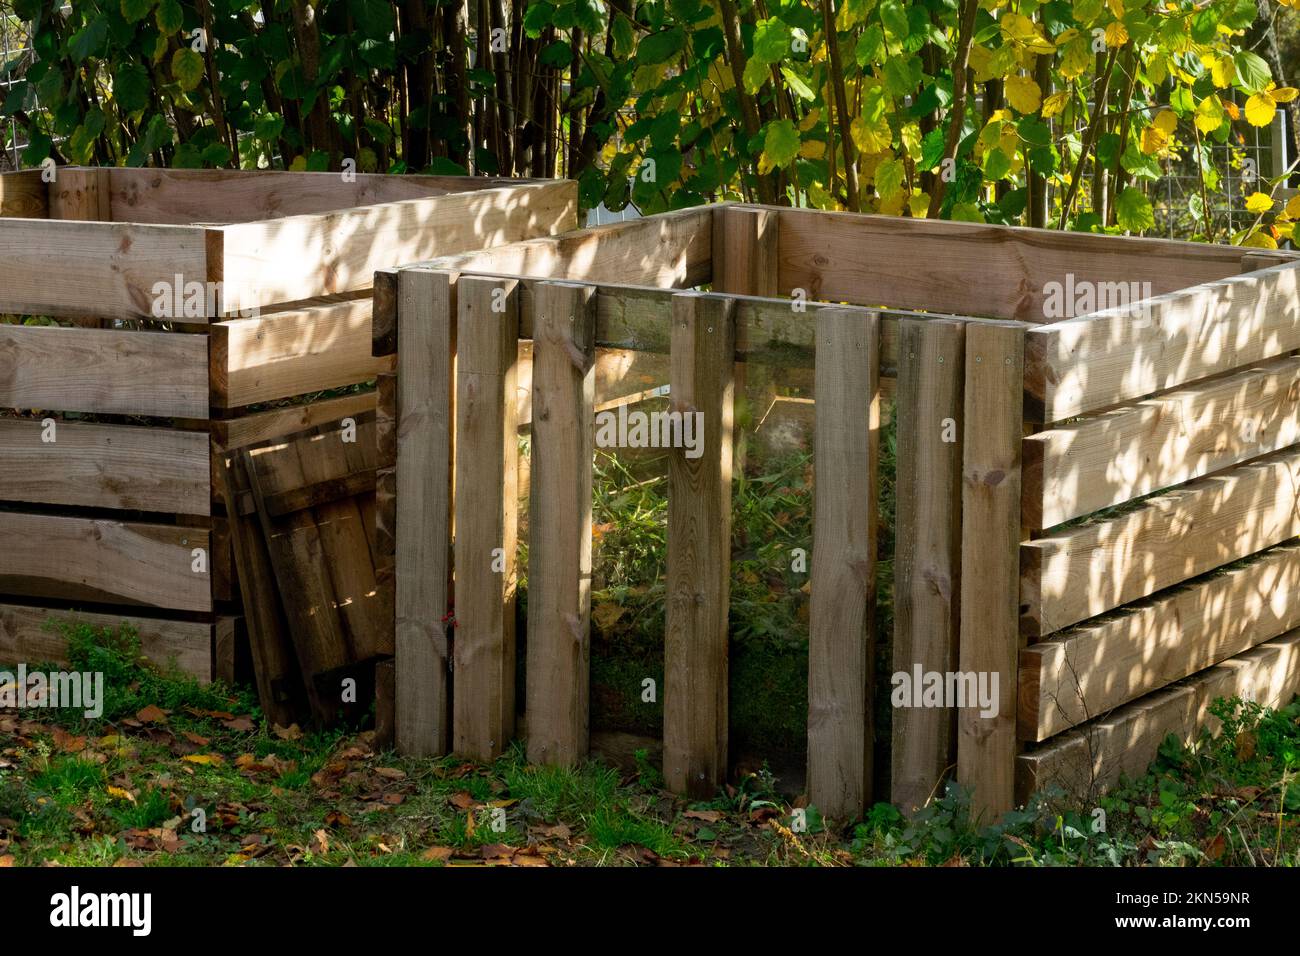 Allot garden composter outdoors, two wooden composters in an autumn garden make biologically humus compost boxes Stock Photo